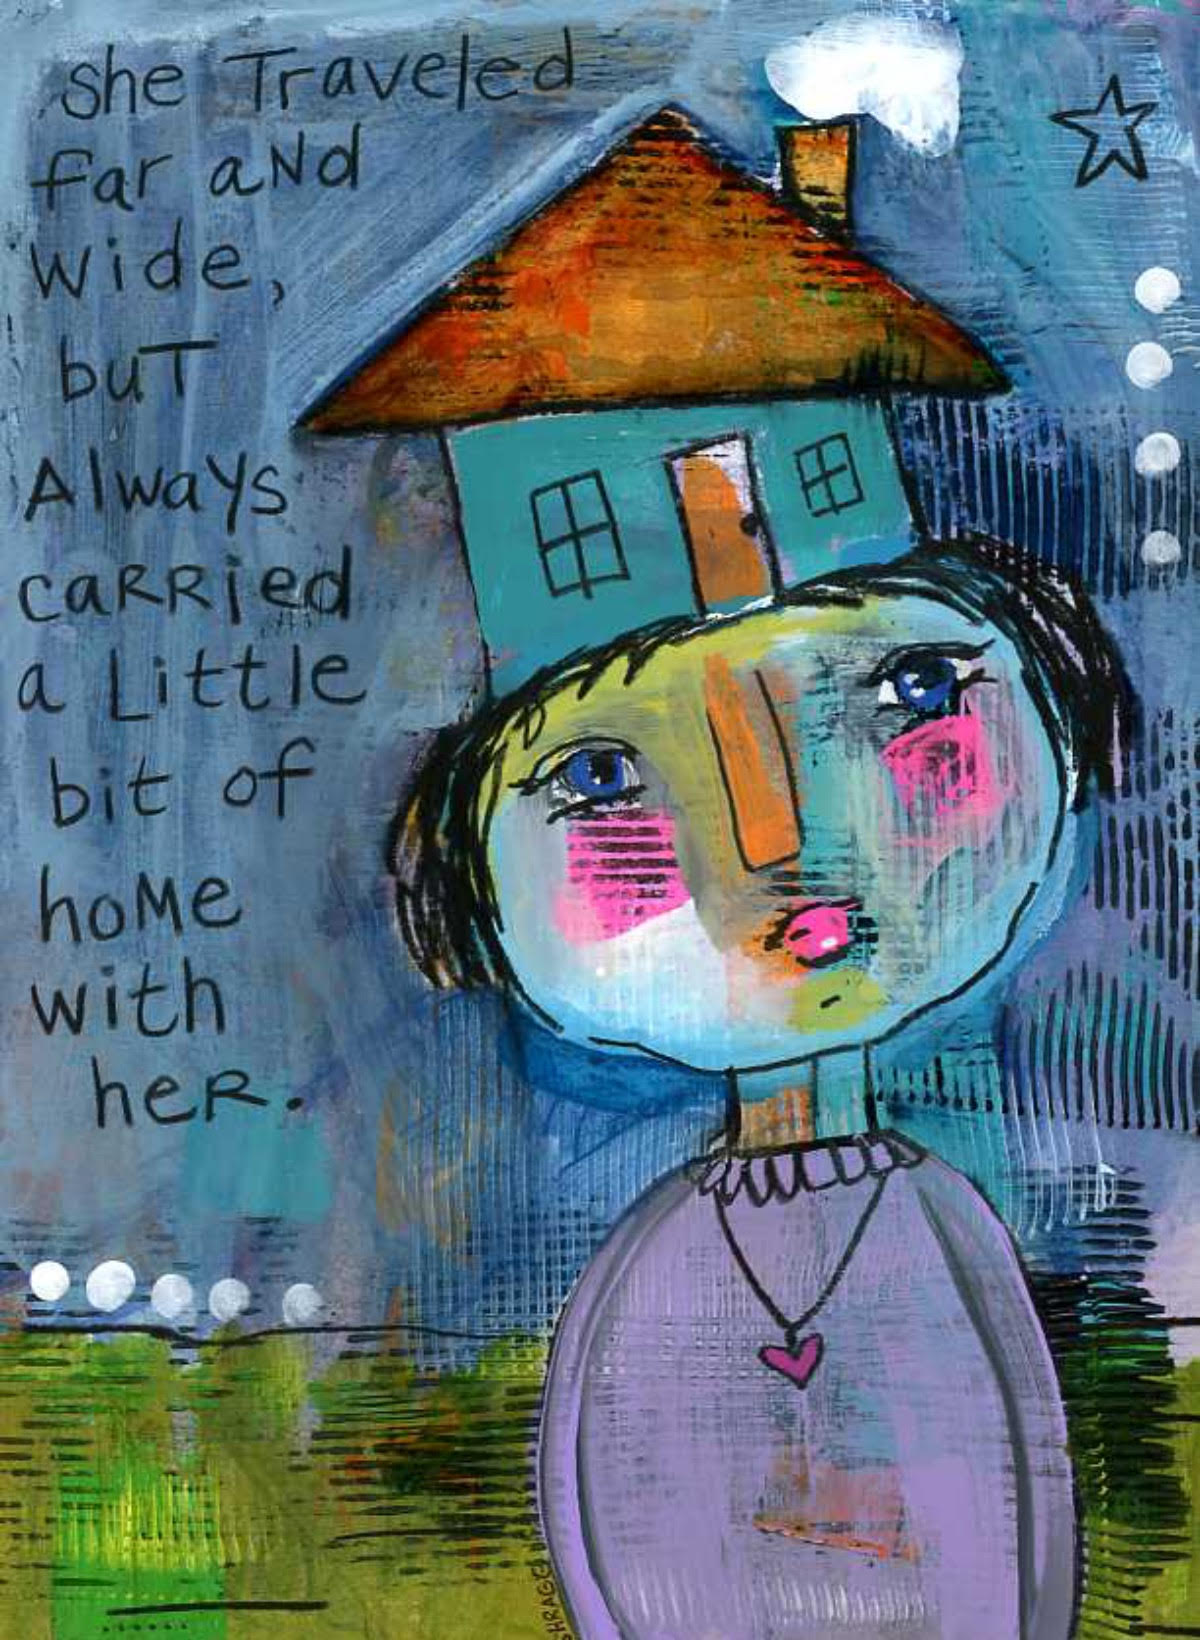 WENDY SHRAGG - A LITTLE BIT OF HOME - MIXED MEDIA - 9 X 12